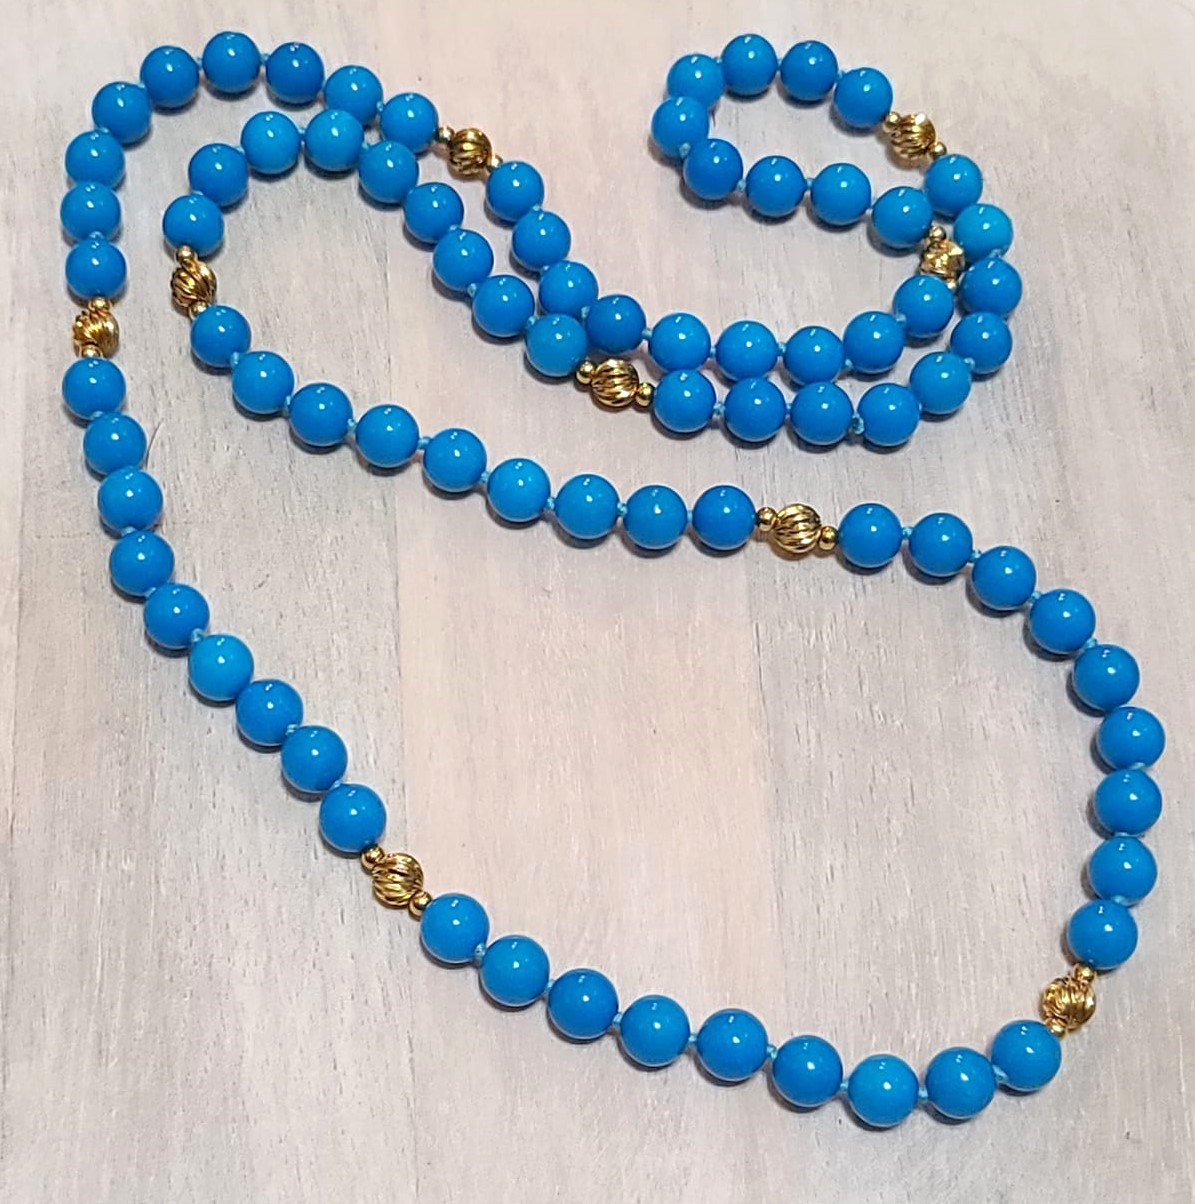 Turquoise glass beaded necklace with gold accent beads 30"